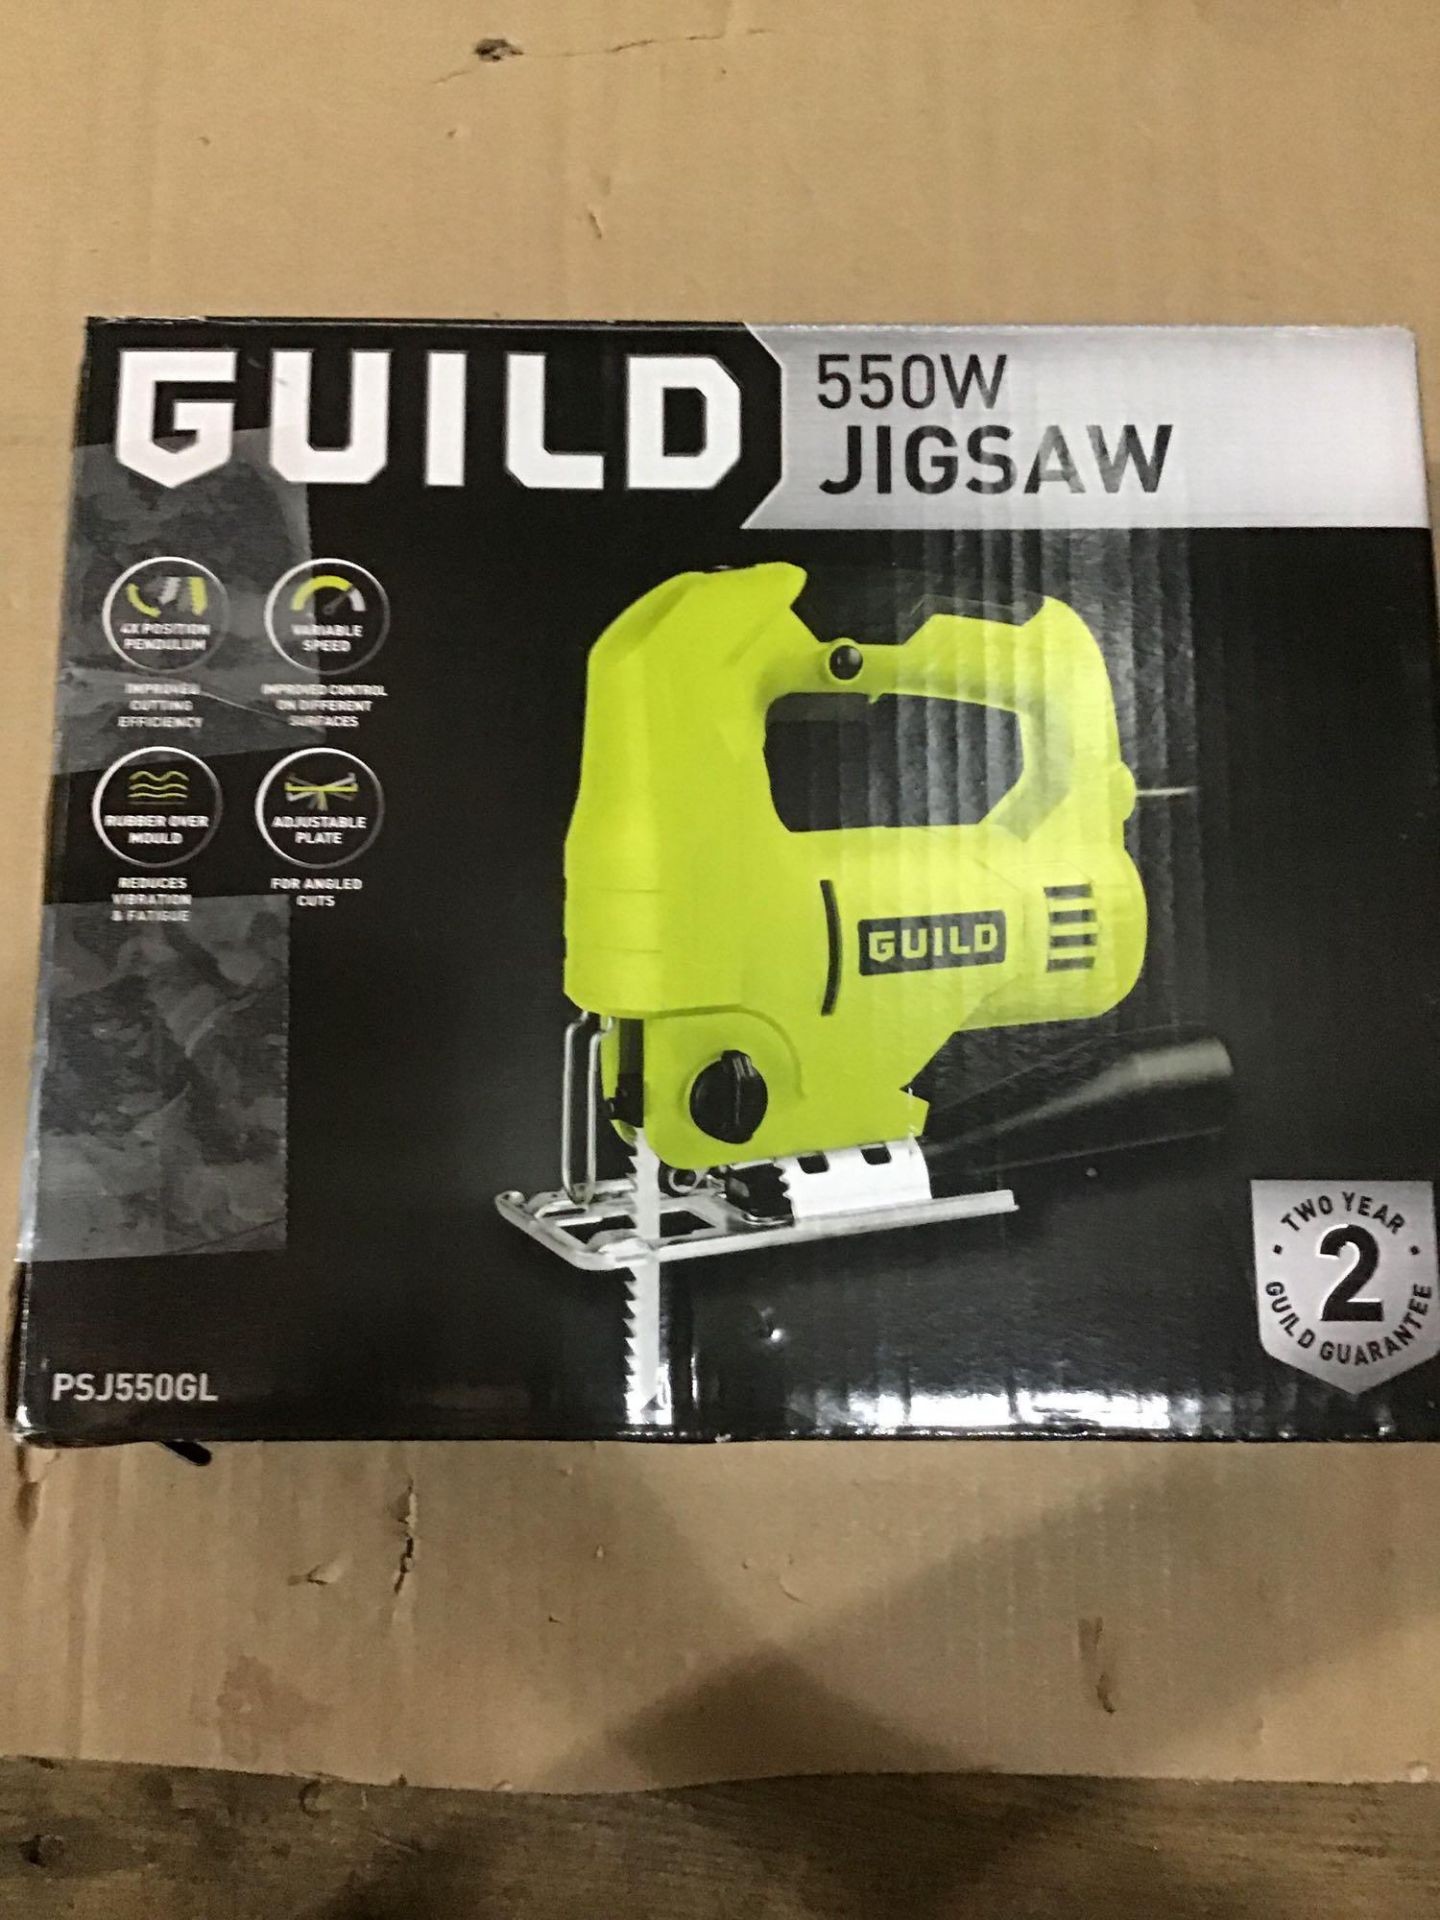 Guild Variable Speed Jigsaw - 550W PSJ550GL 455/3515 - £20.00 RRP - Image 2 of 6